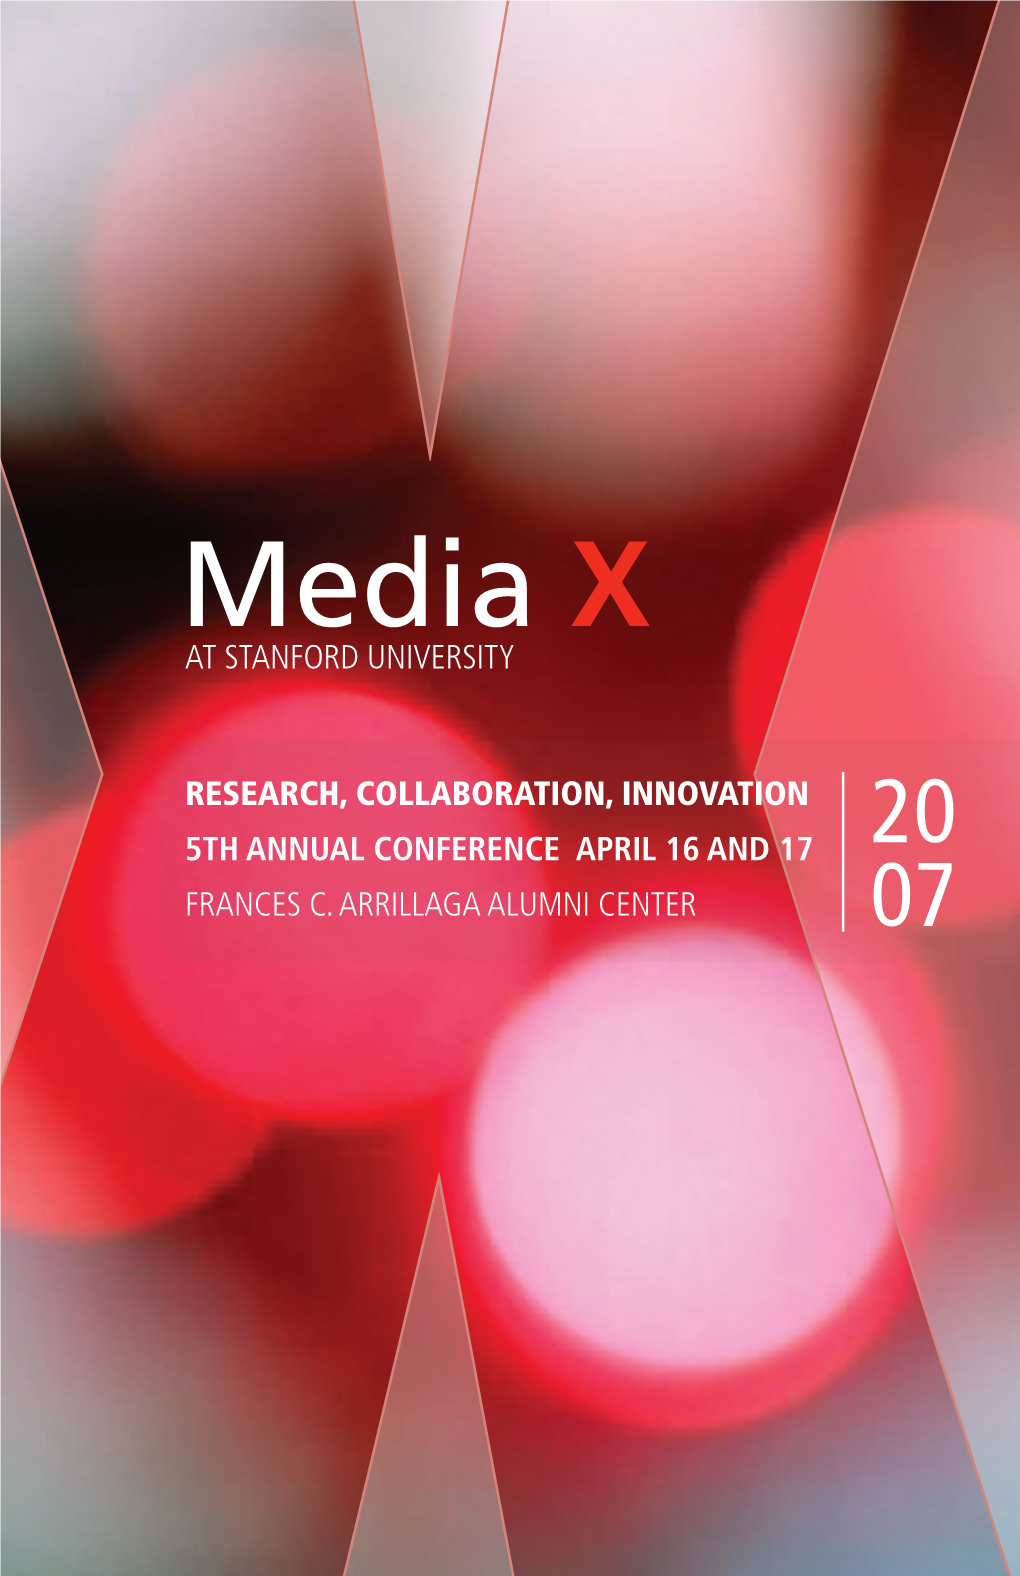 5Th Annual Media X Conference on Research